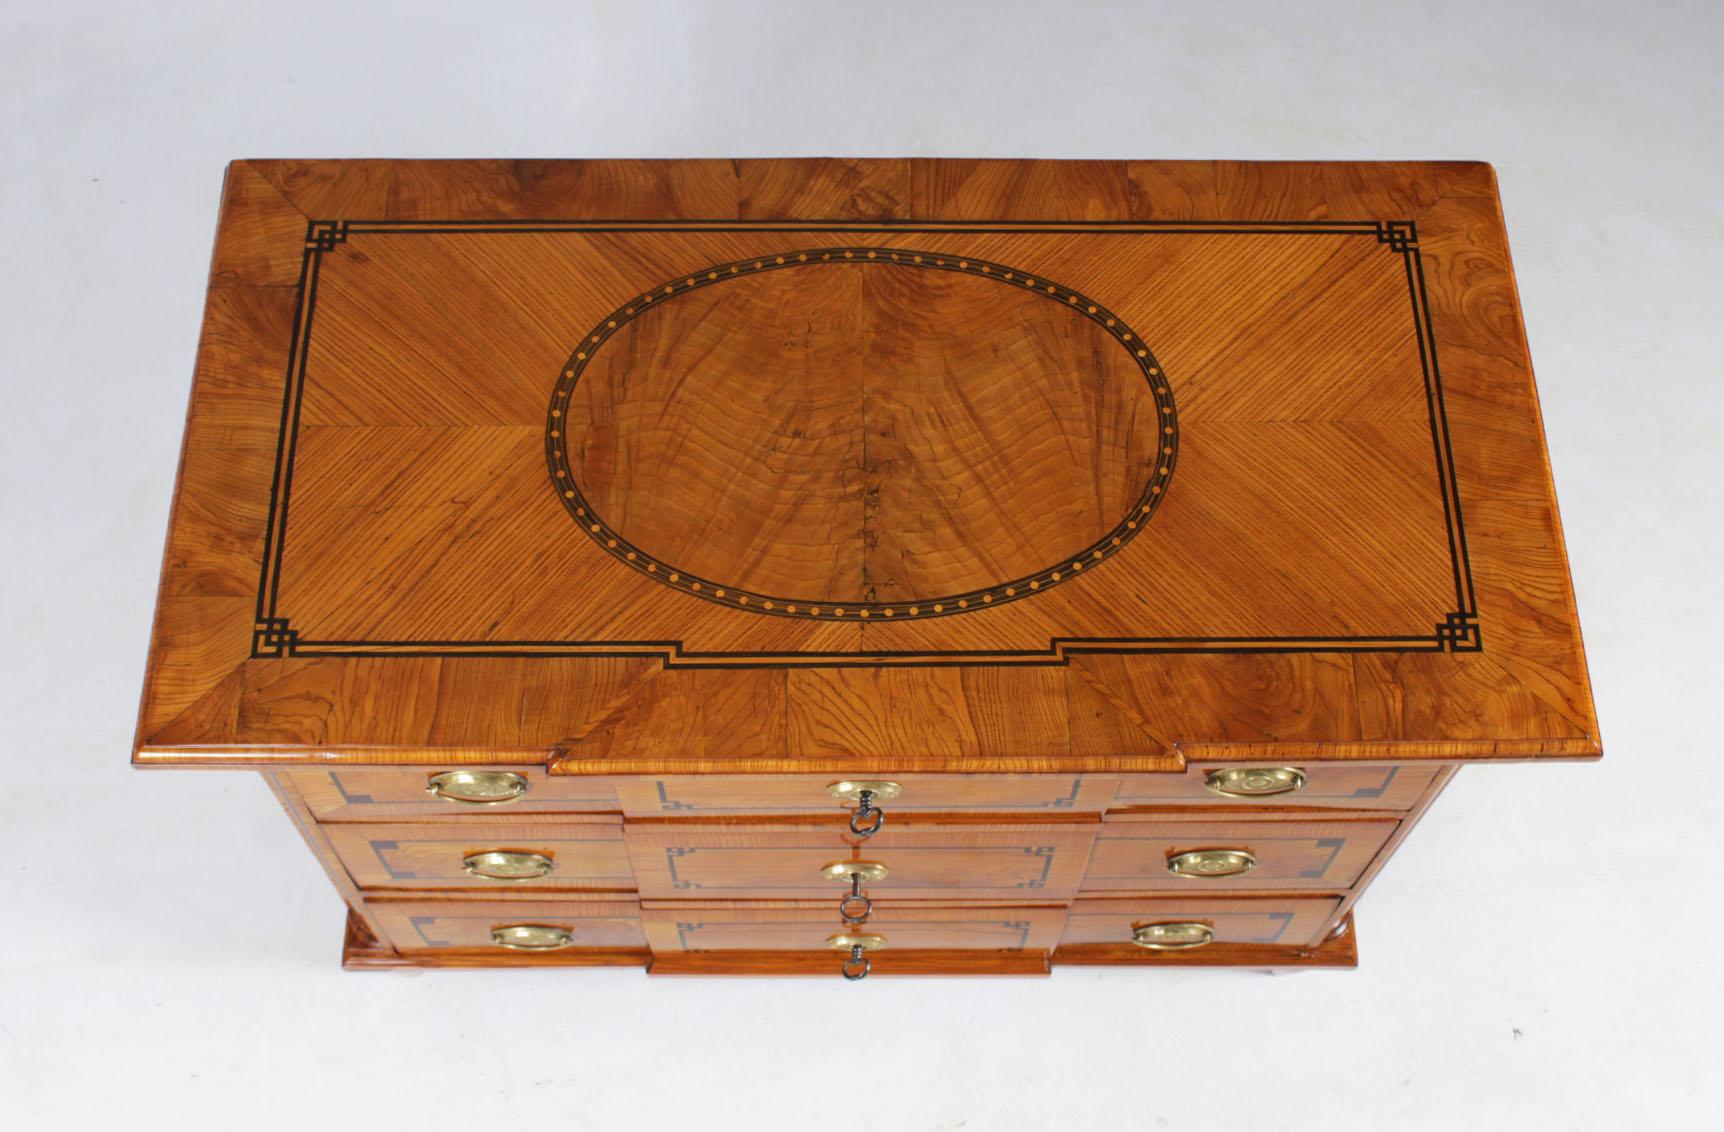 Bright Louis XVI chest of drawers with geometric marquetry

Brunswick
Ash
Classicism around 1790

Dimensions: H x W x D: 79 x 107 x 54 cm

Description:
Beautiful small chest of drawers with light base wood and dark contrasting